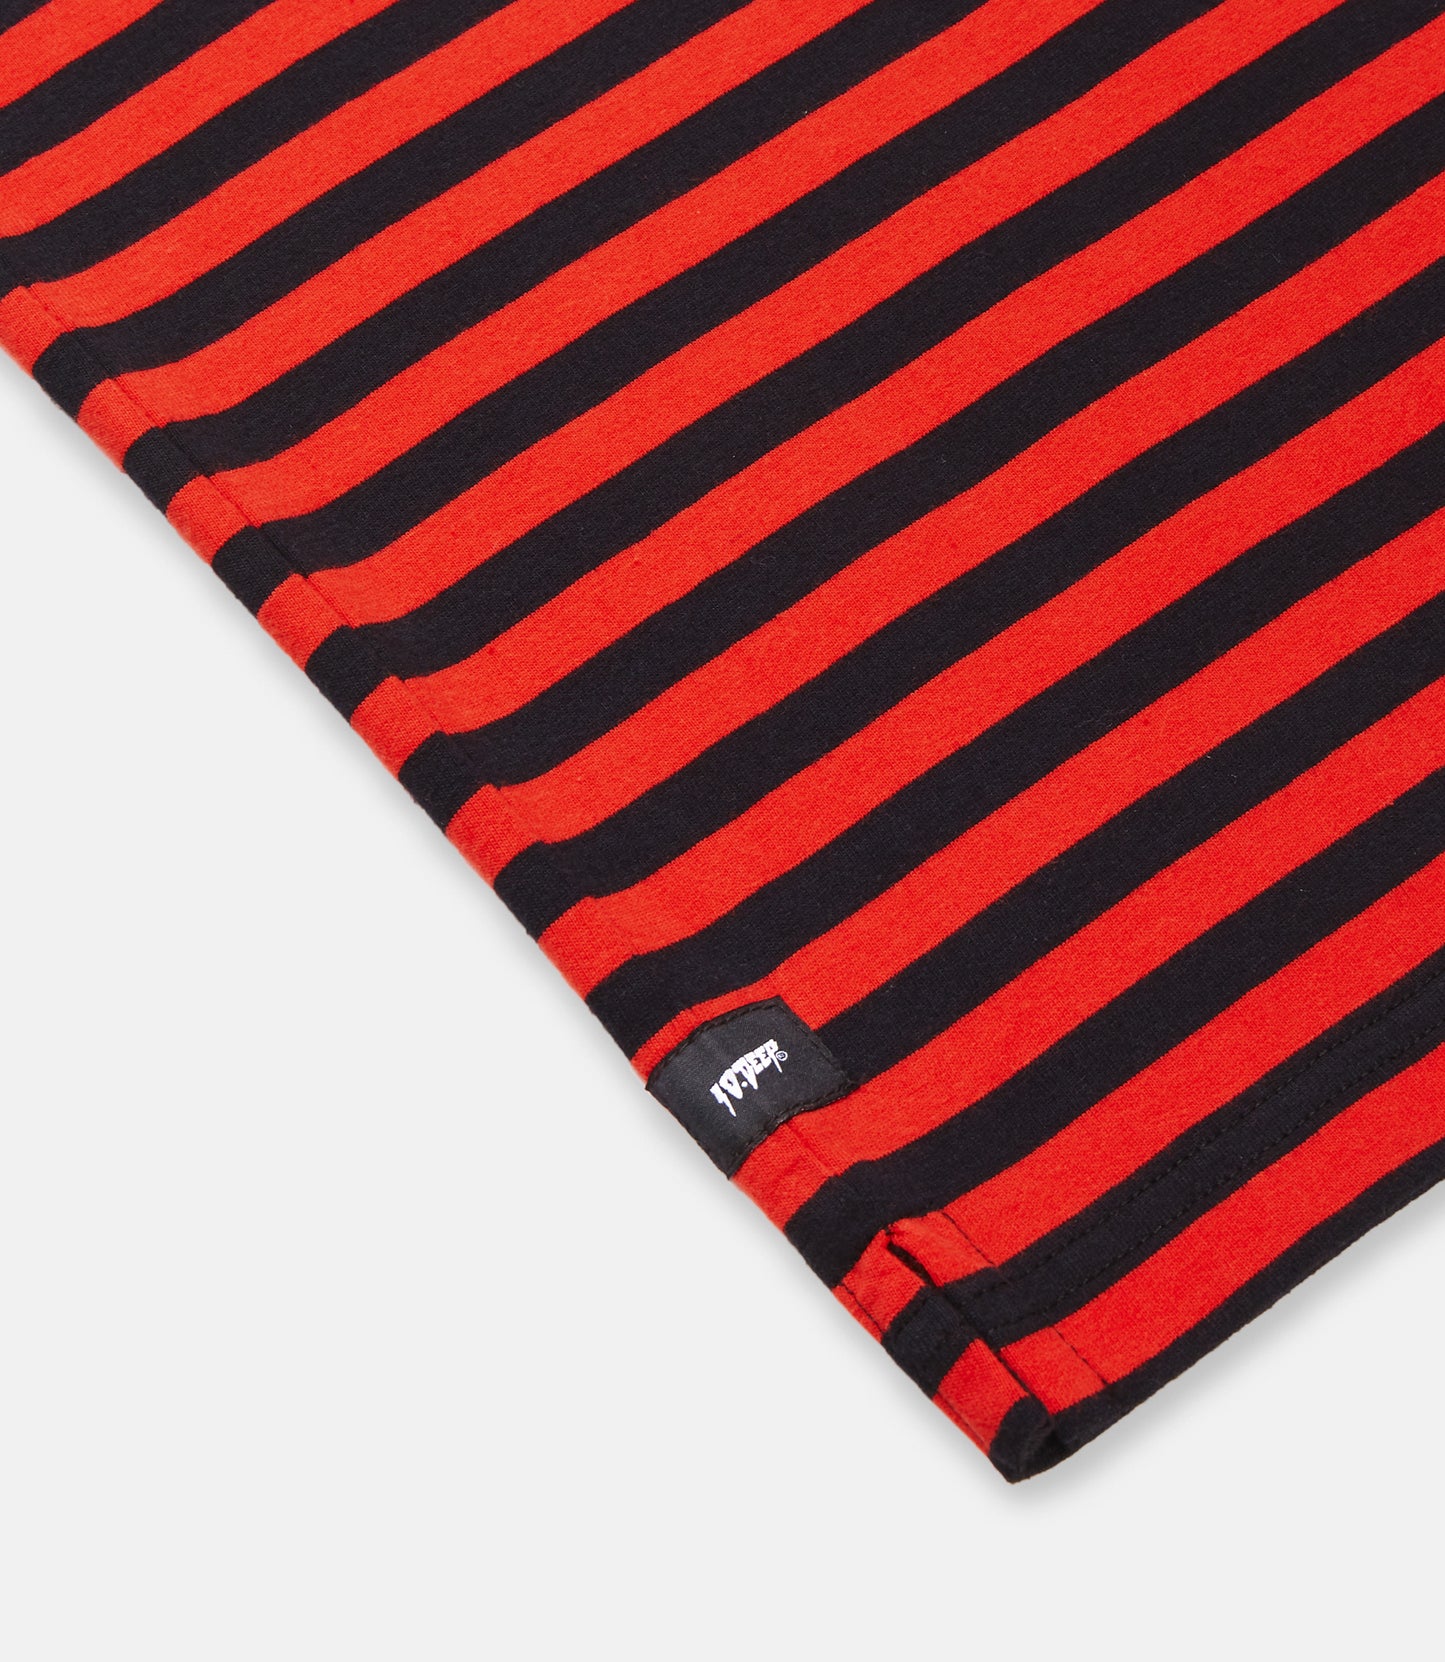 10Deep - Foreigner Striped Men's Tee, Red